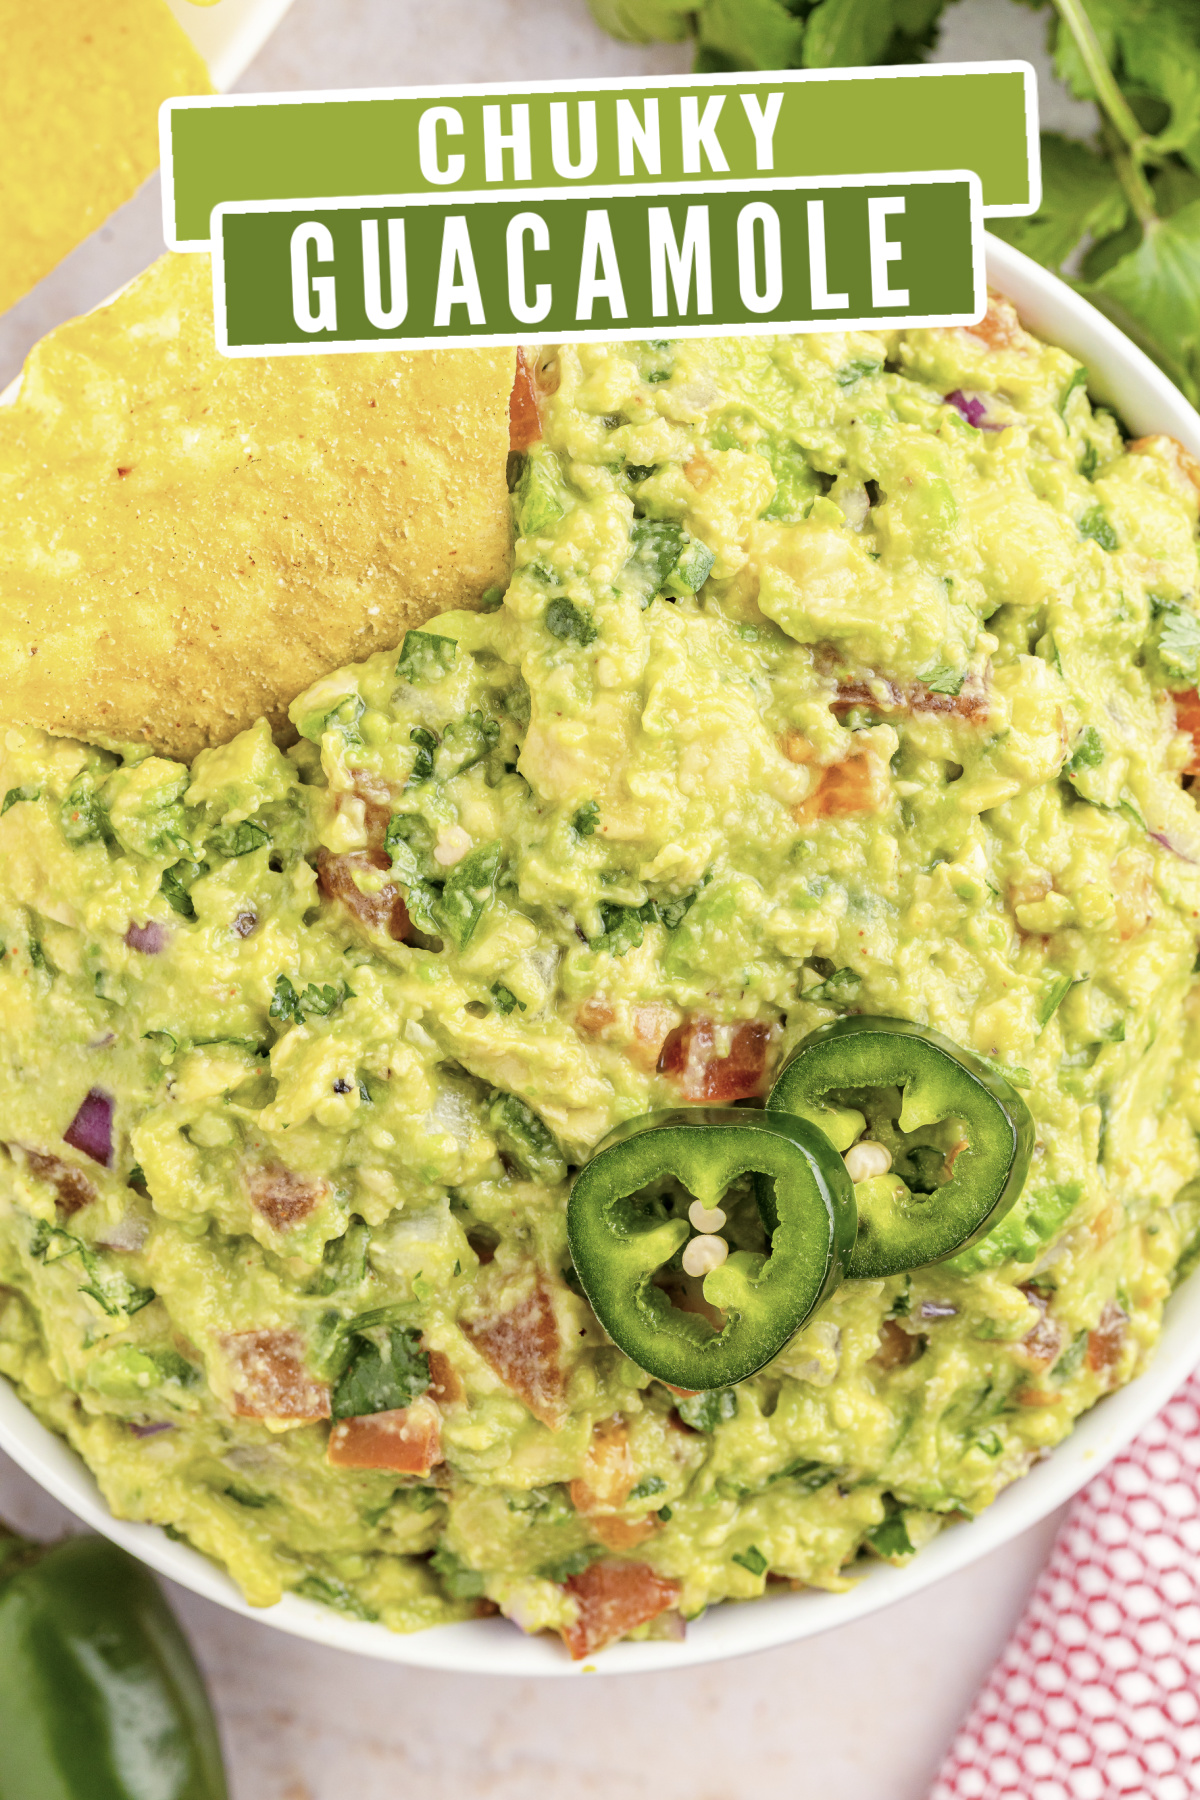 Make your next party or taco Tuesday extra special with this delicious and easy chunky guacamole recipe made with fresh ingredients!